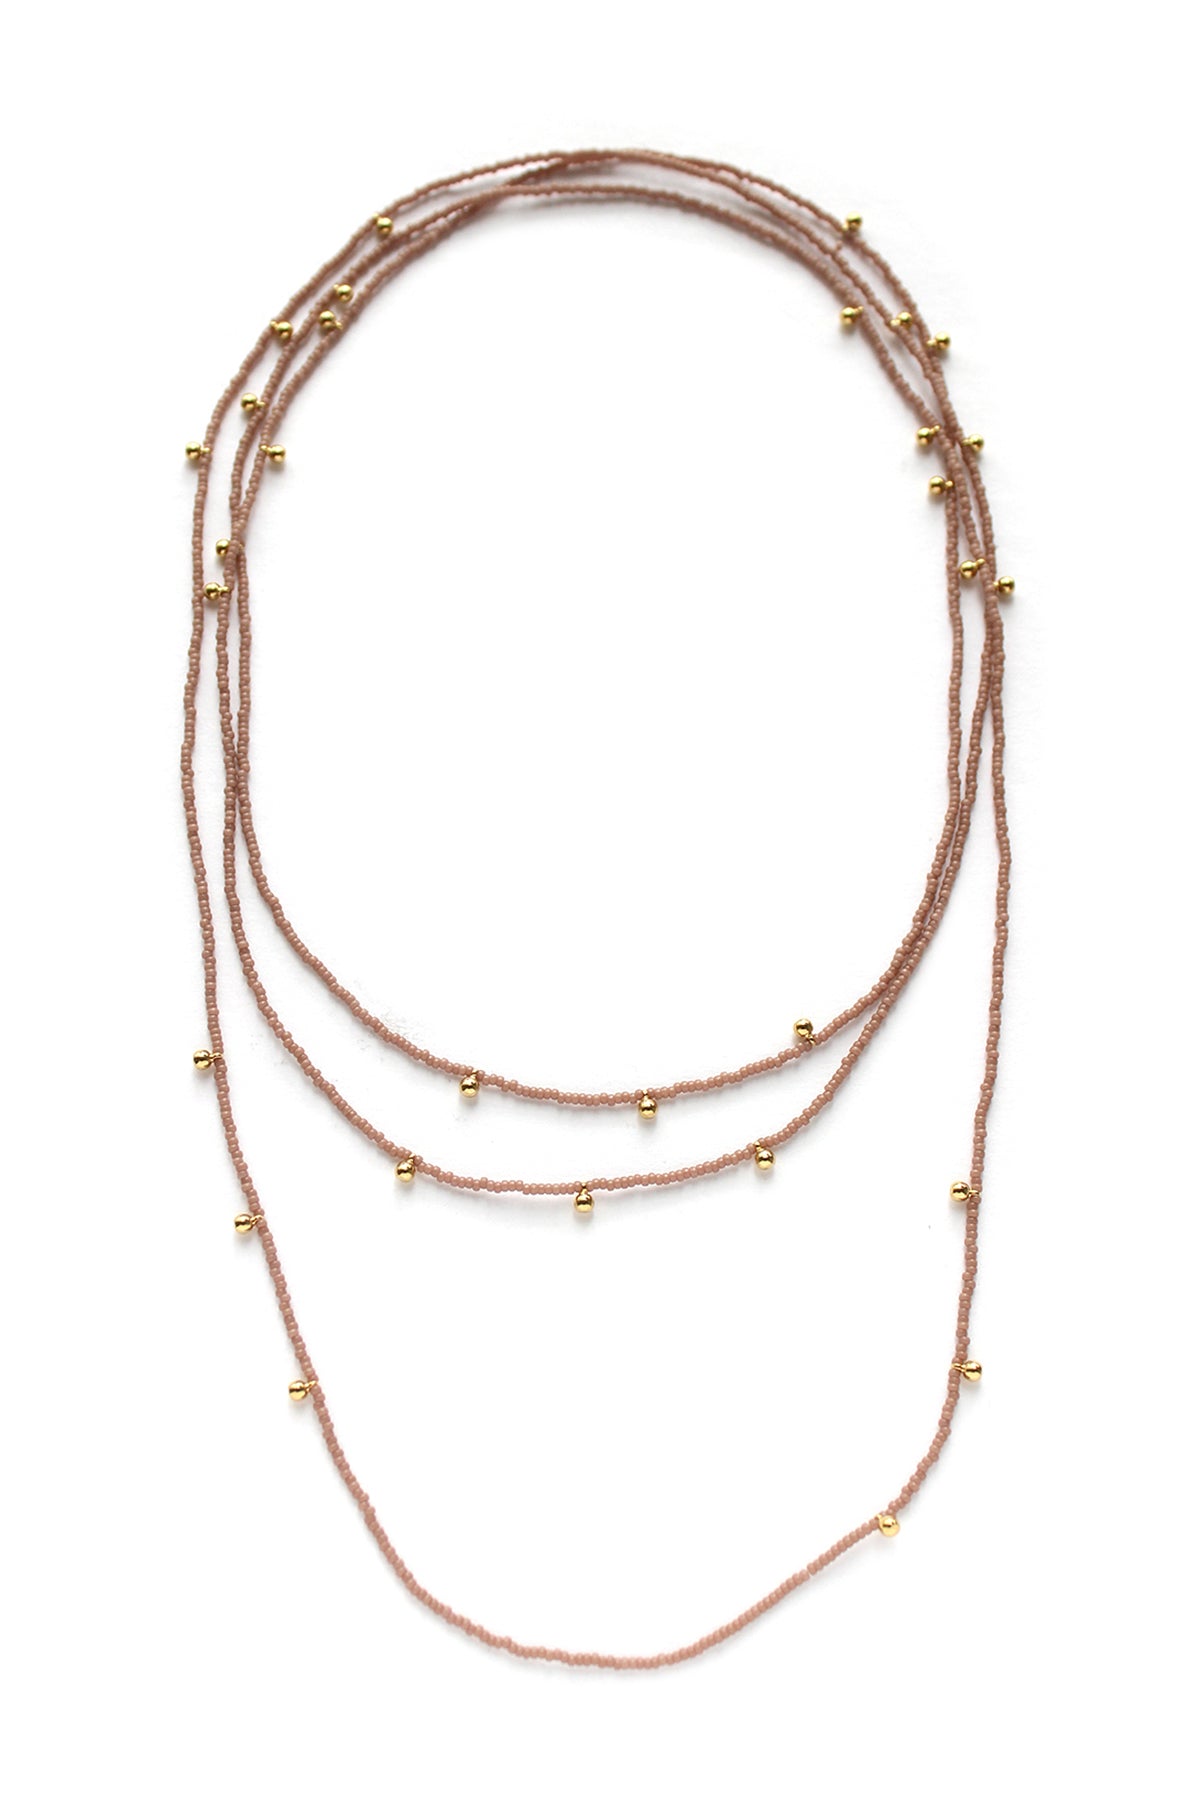   RILEY BEADED NECKLACE BY BLUMA PROJECT 